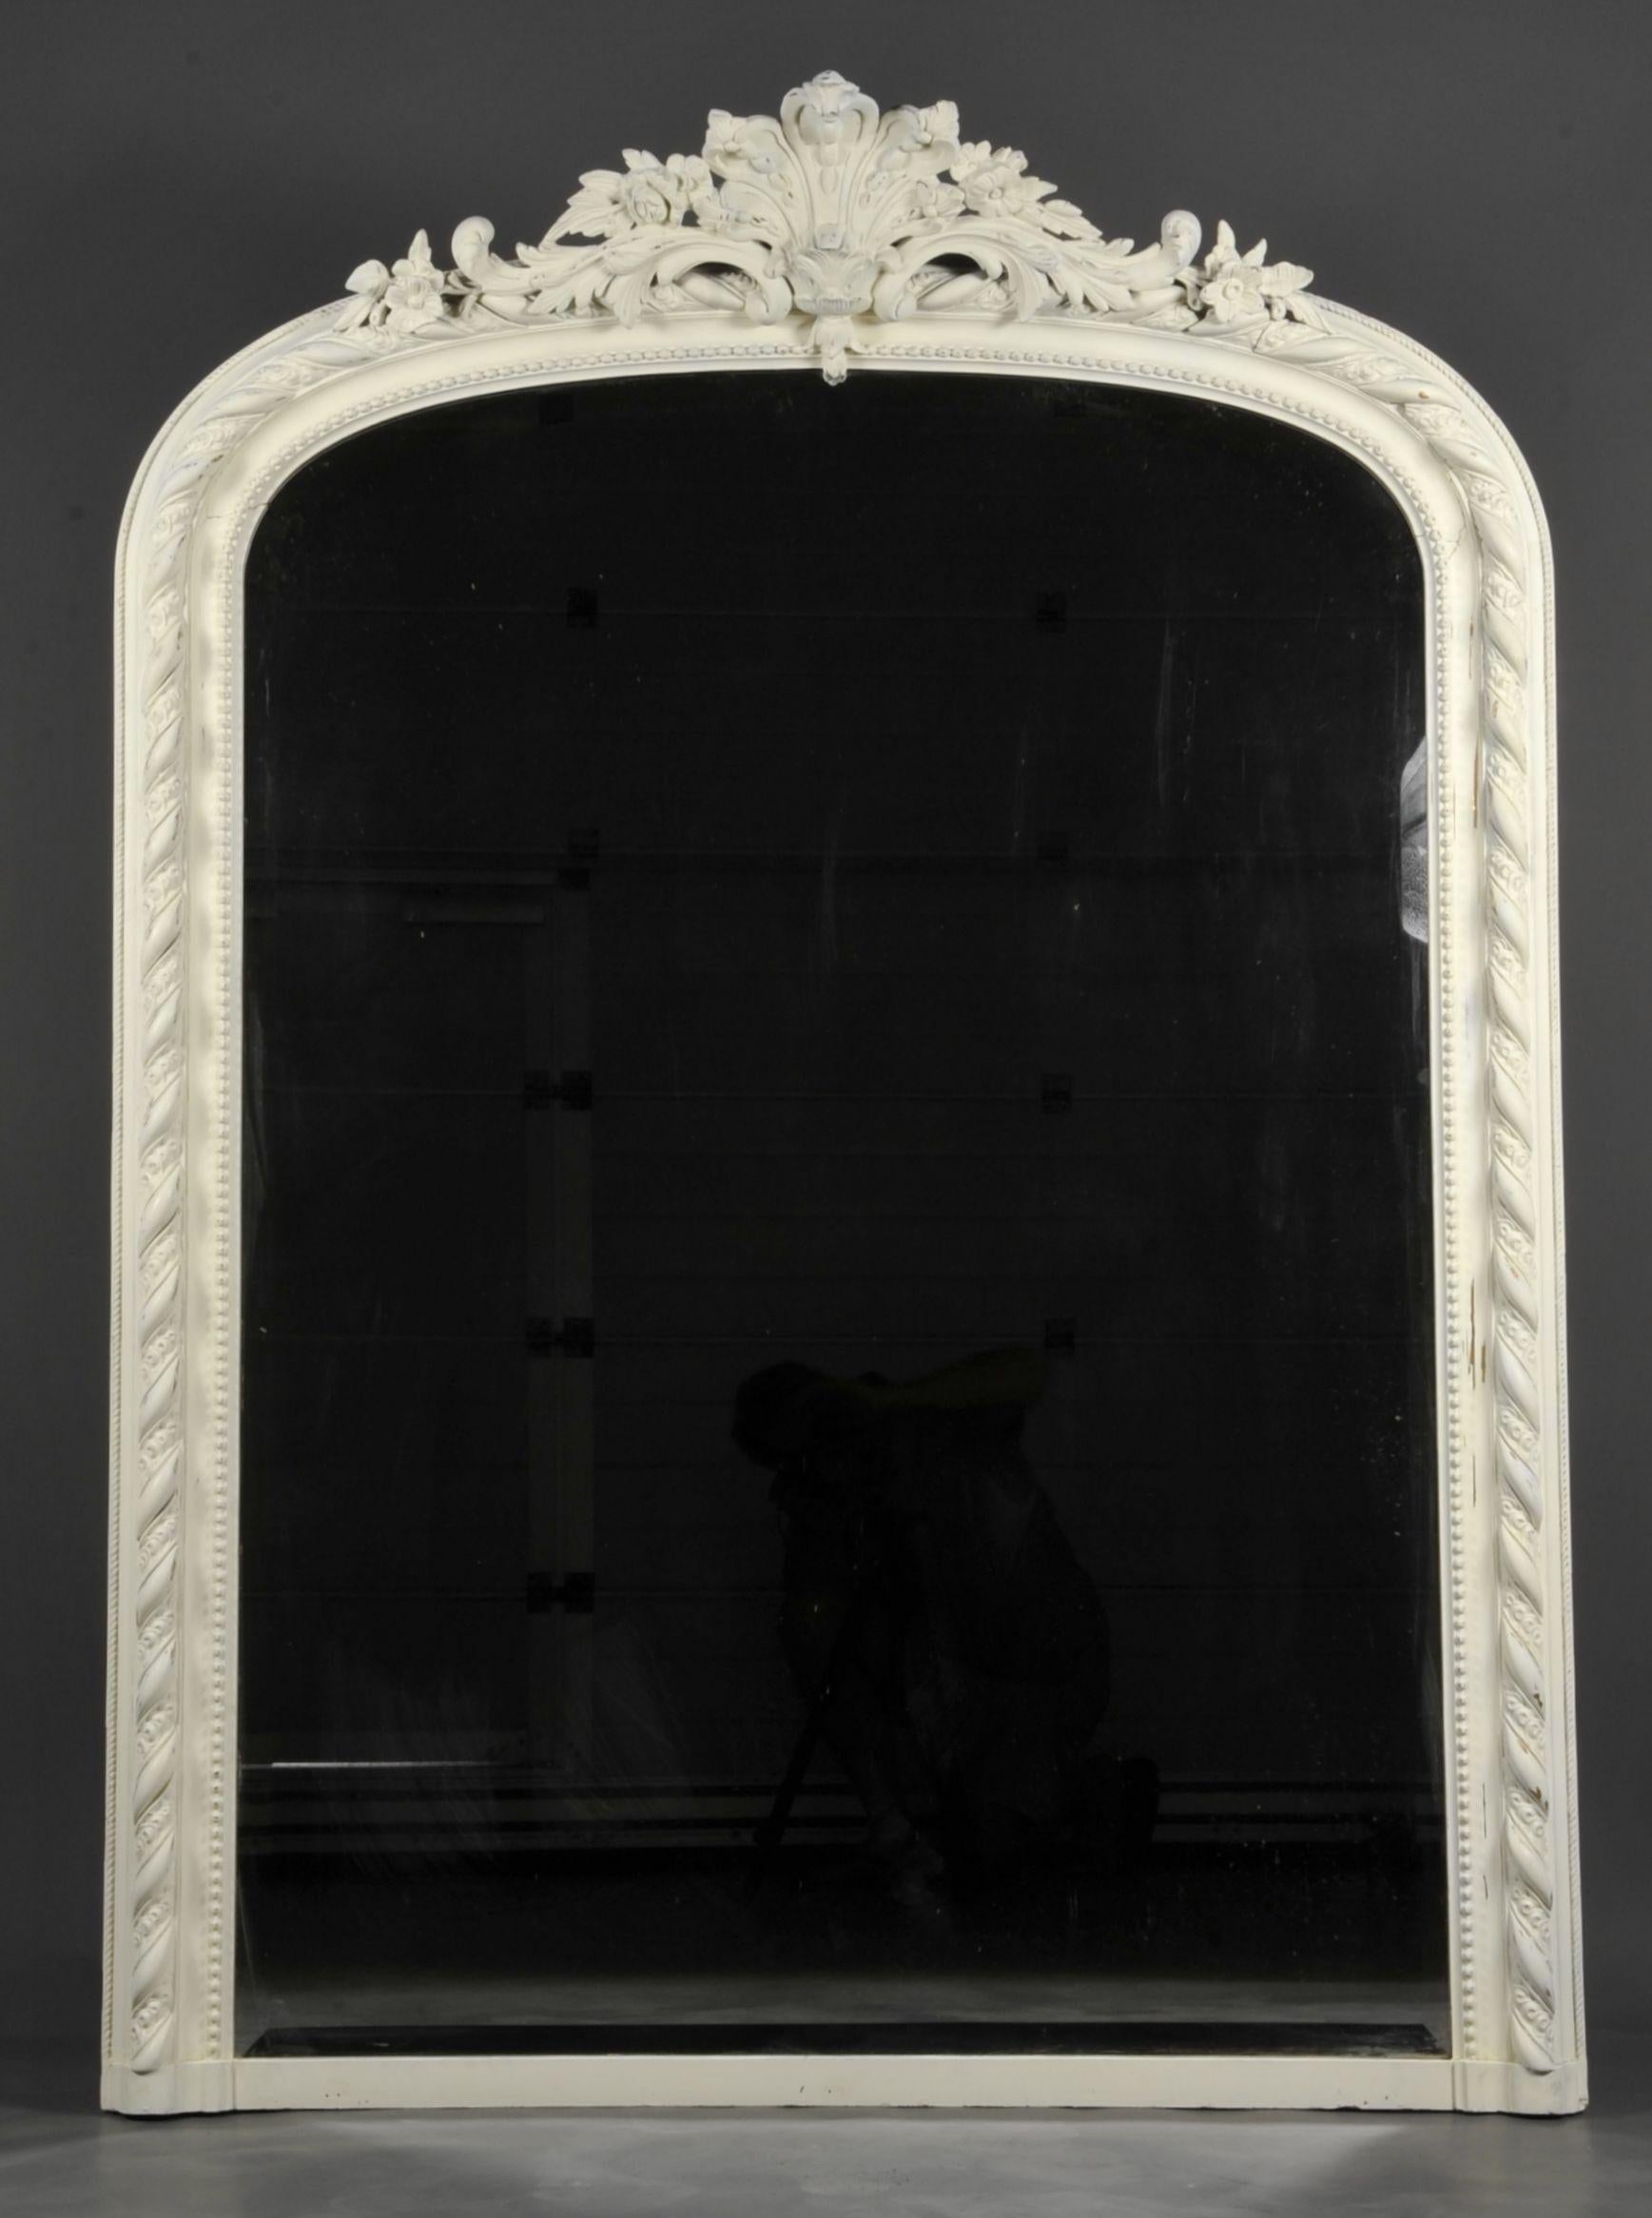 Large Napoleon III Period Mirror In Off-white lacquered wood and stucco with a rich decor of beaded friezes, gadroons and interlacing, surmounted by a large pediment decorated with scrolls and floral patterns

The mirror is beveled and in very